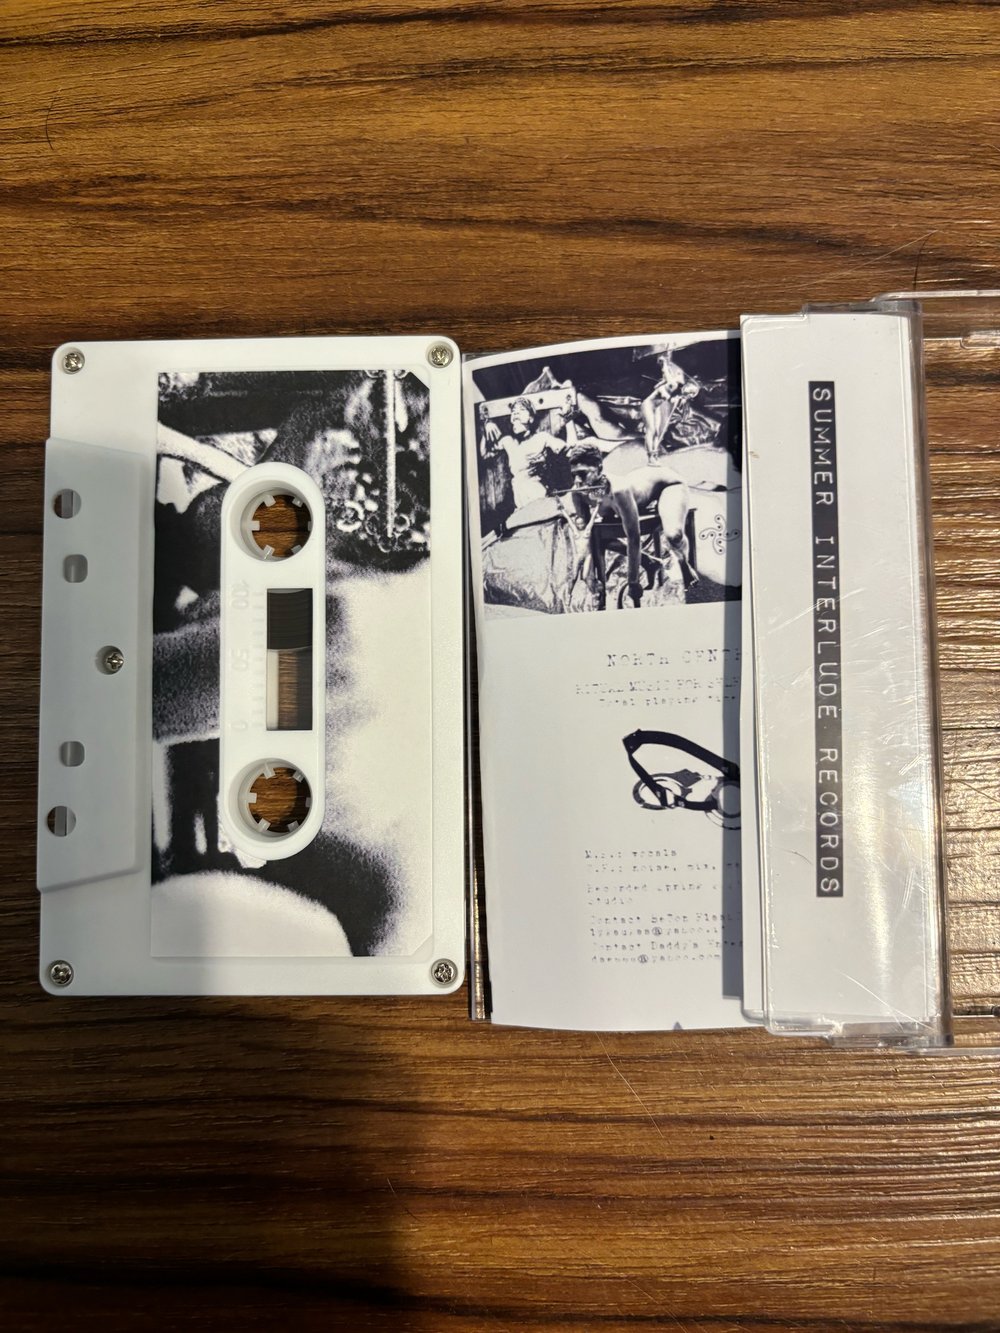 North Central - Ritual Music for Self-Harming Cassette Reissue